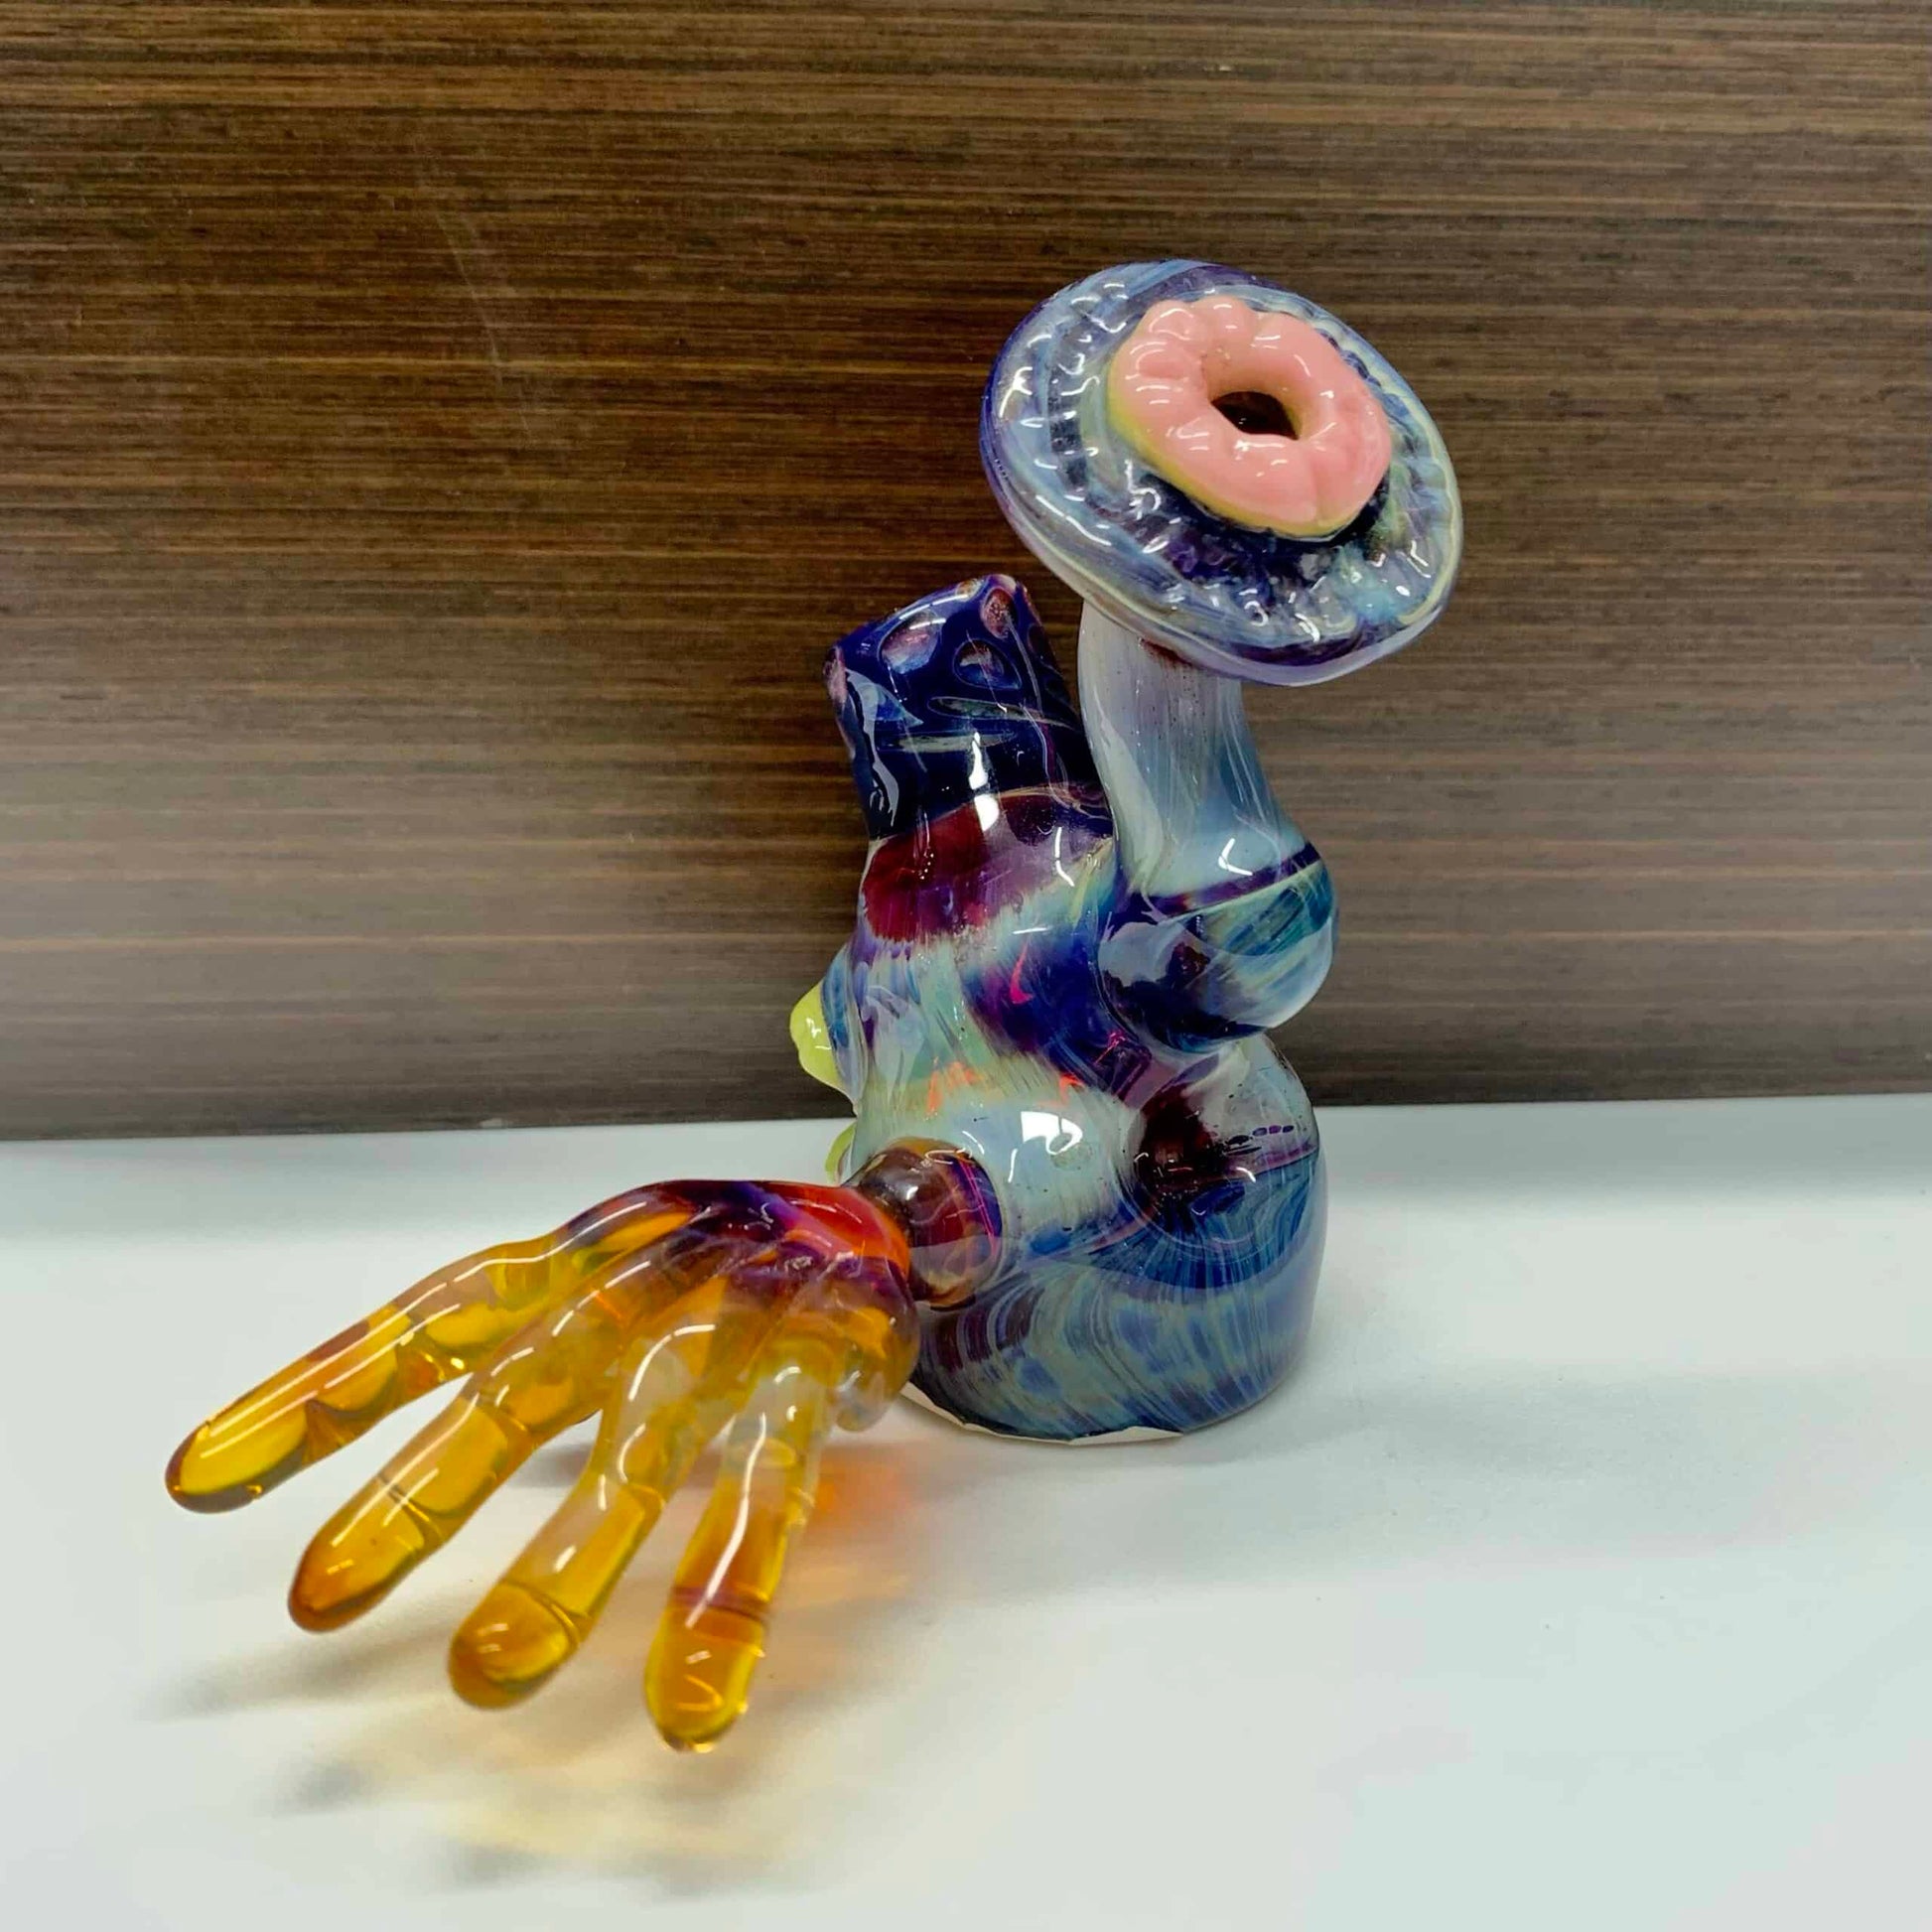 meticulously crafted design of the Asshole Rig by Trouble the Maker